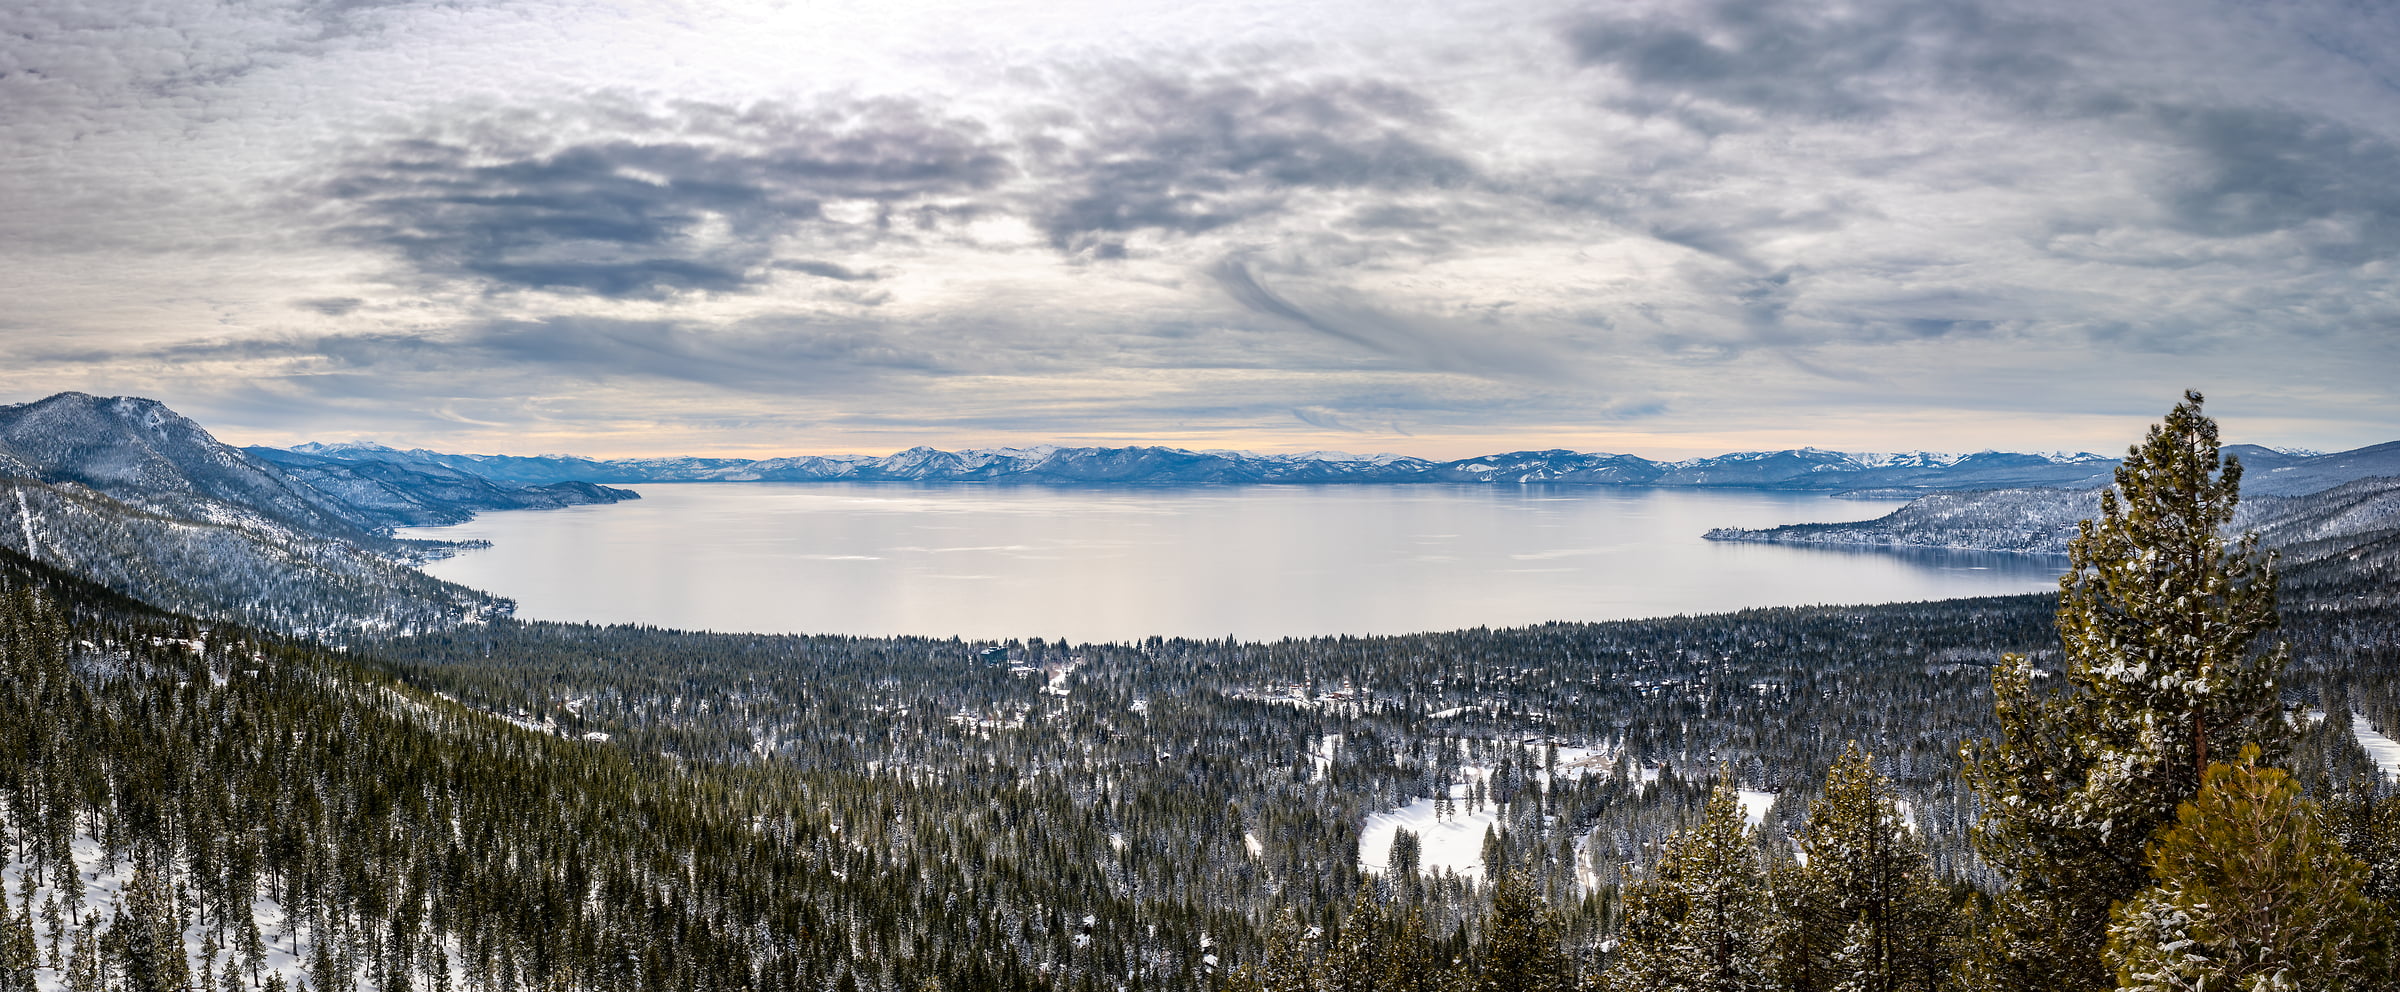 274 megapixels! A very high resolution, landscape photo of Lake Tahoe in winter; landscape photograph created by Justin Katz in Mount Rose Highway, Lake Tahoe, Nevada.